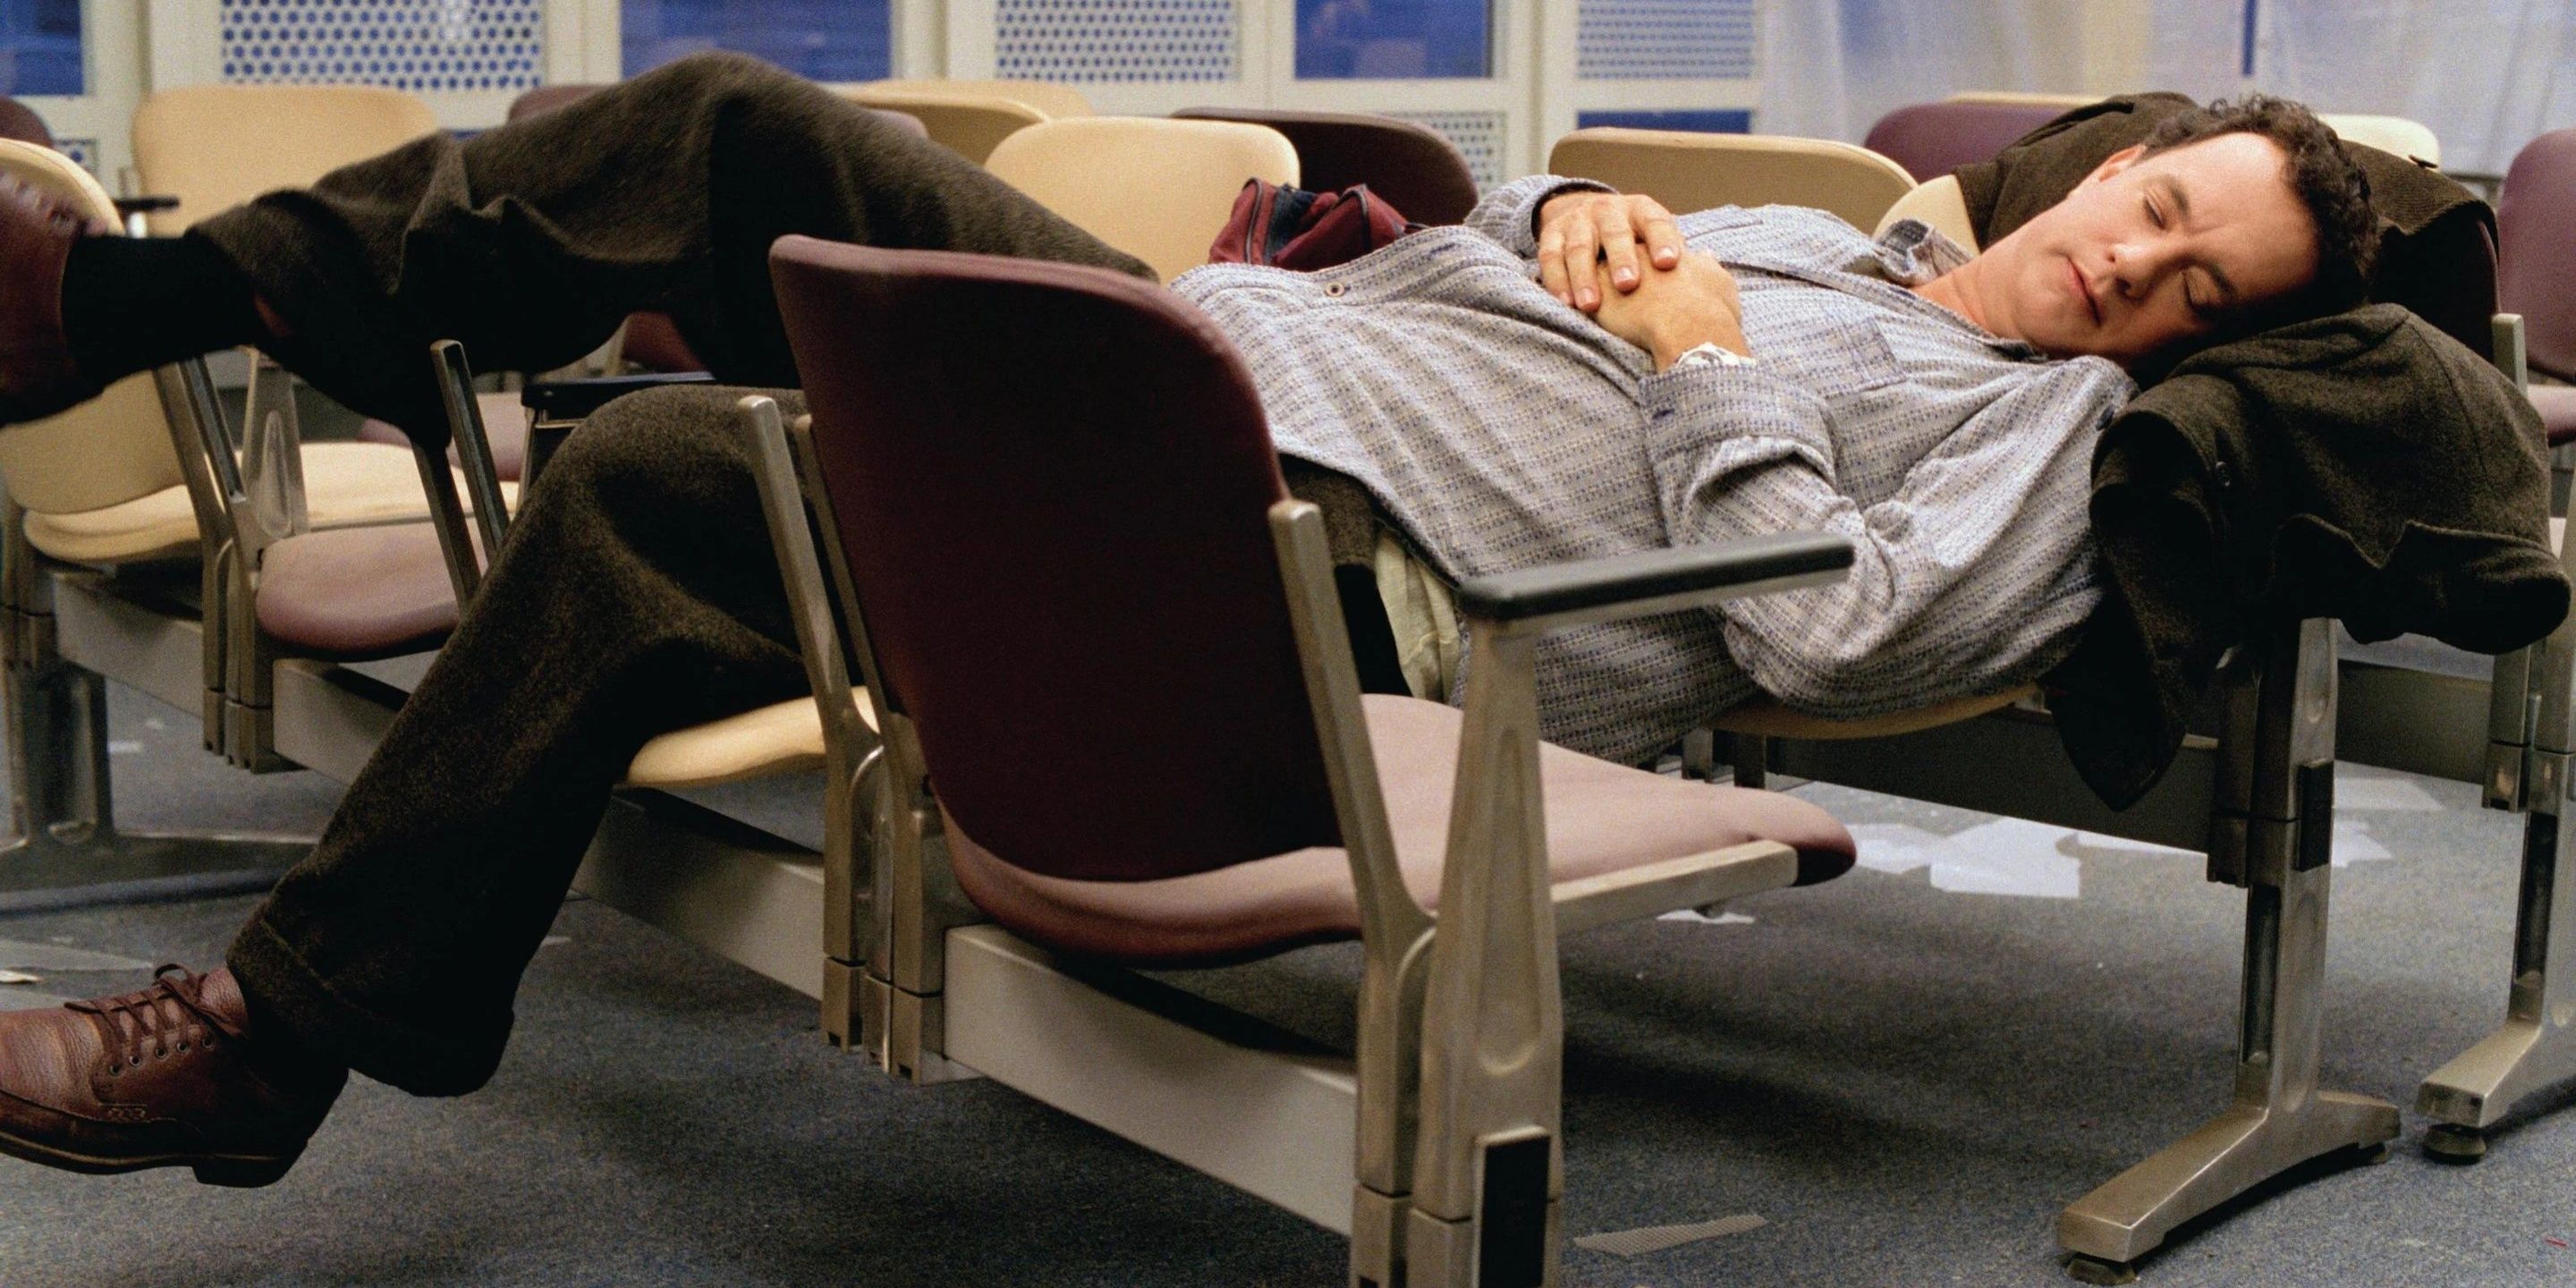 Viktor sleeping in chairs in The Terminal